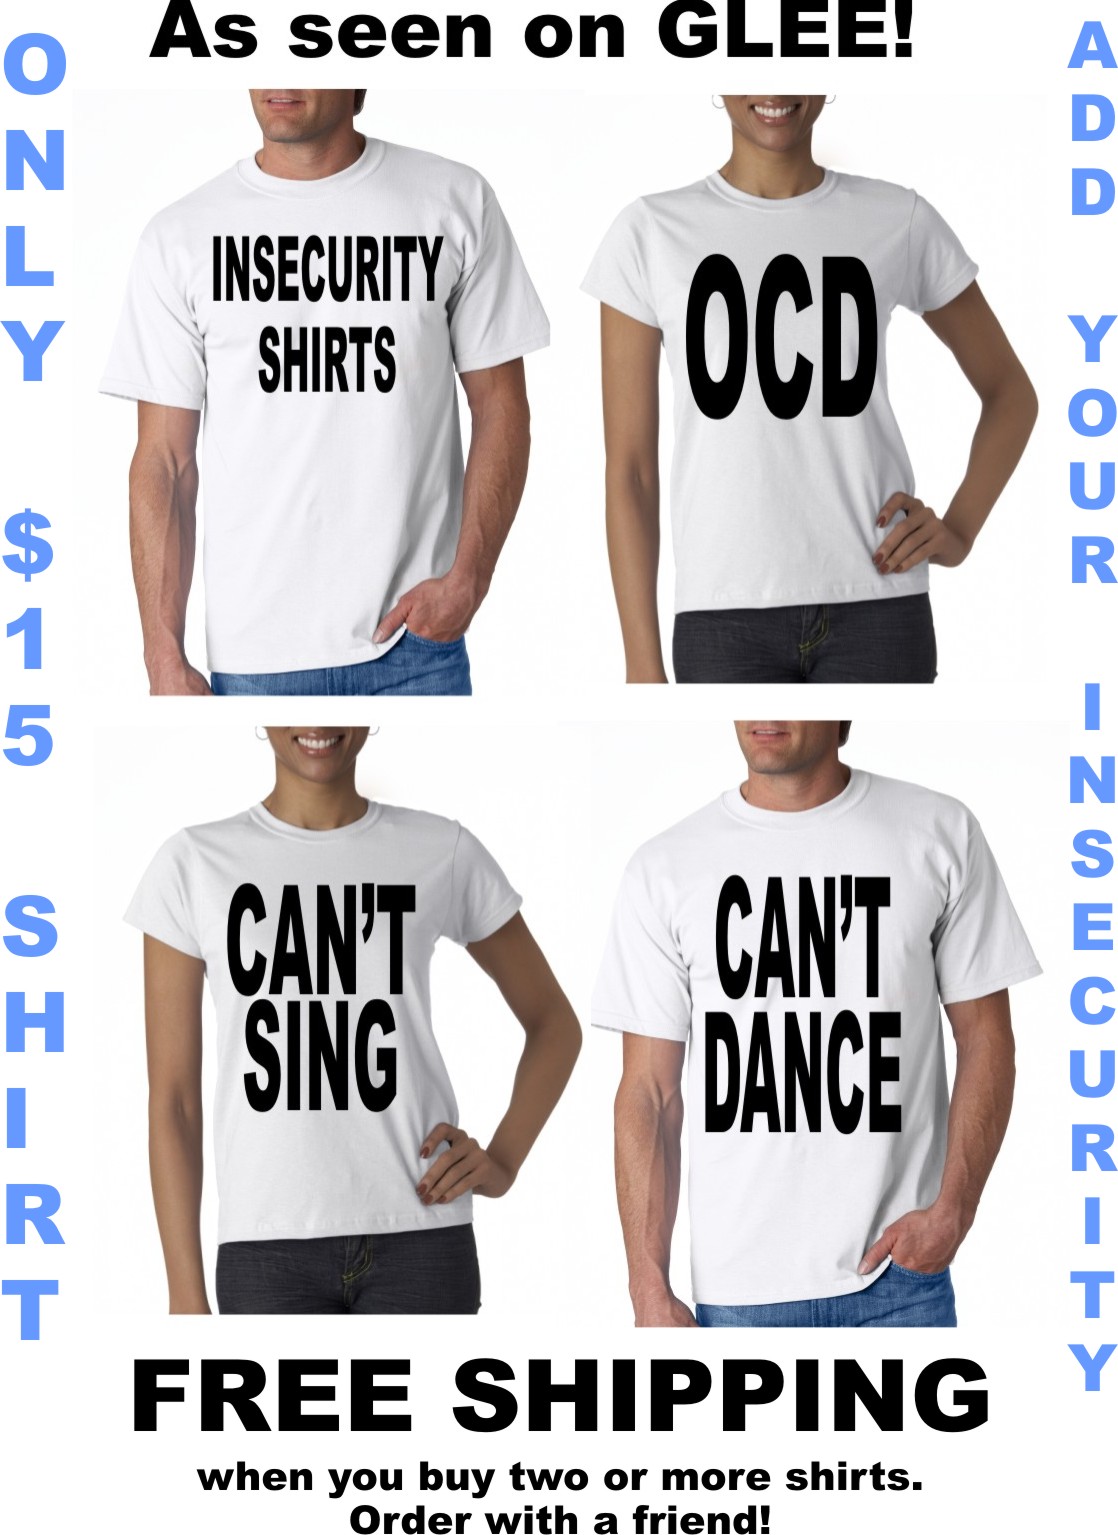 insecurity shirt ad